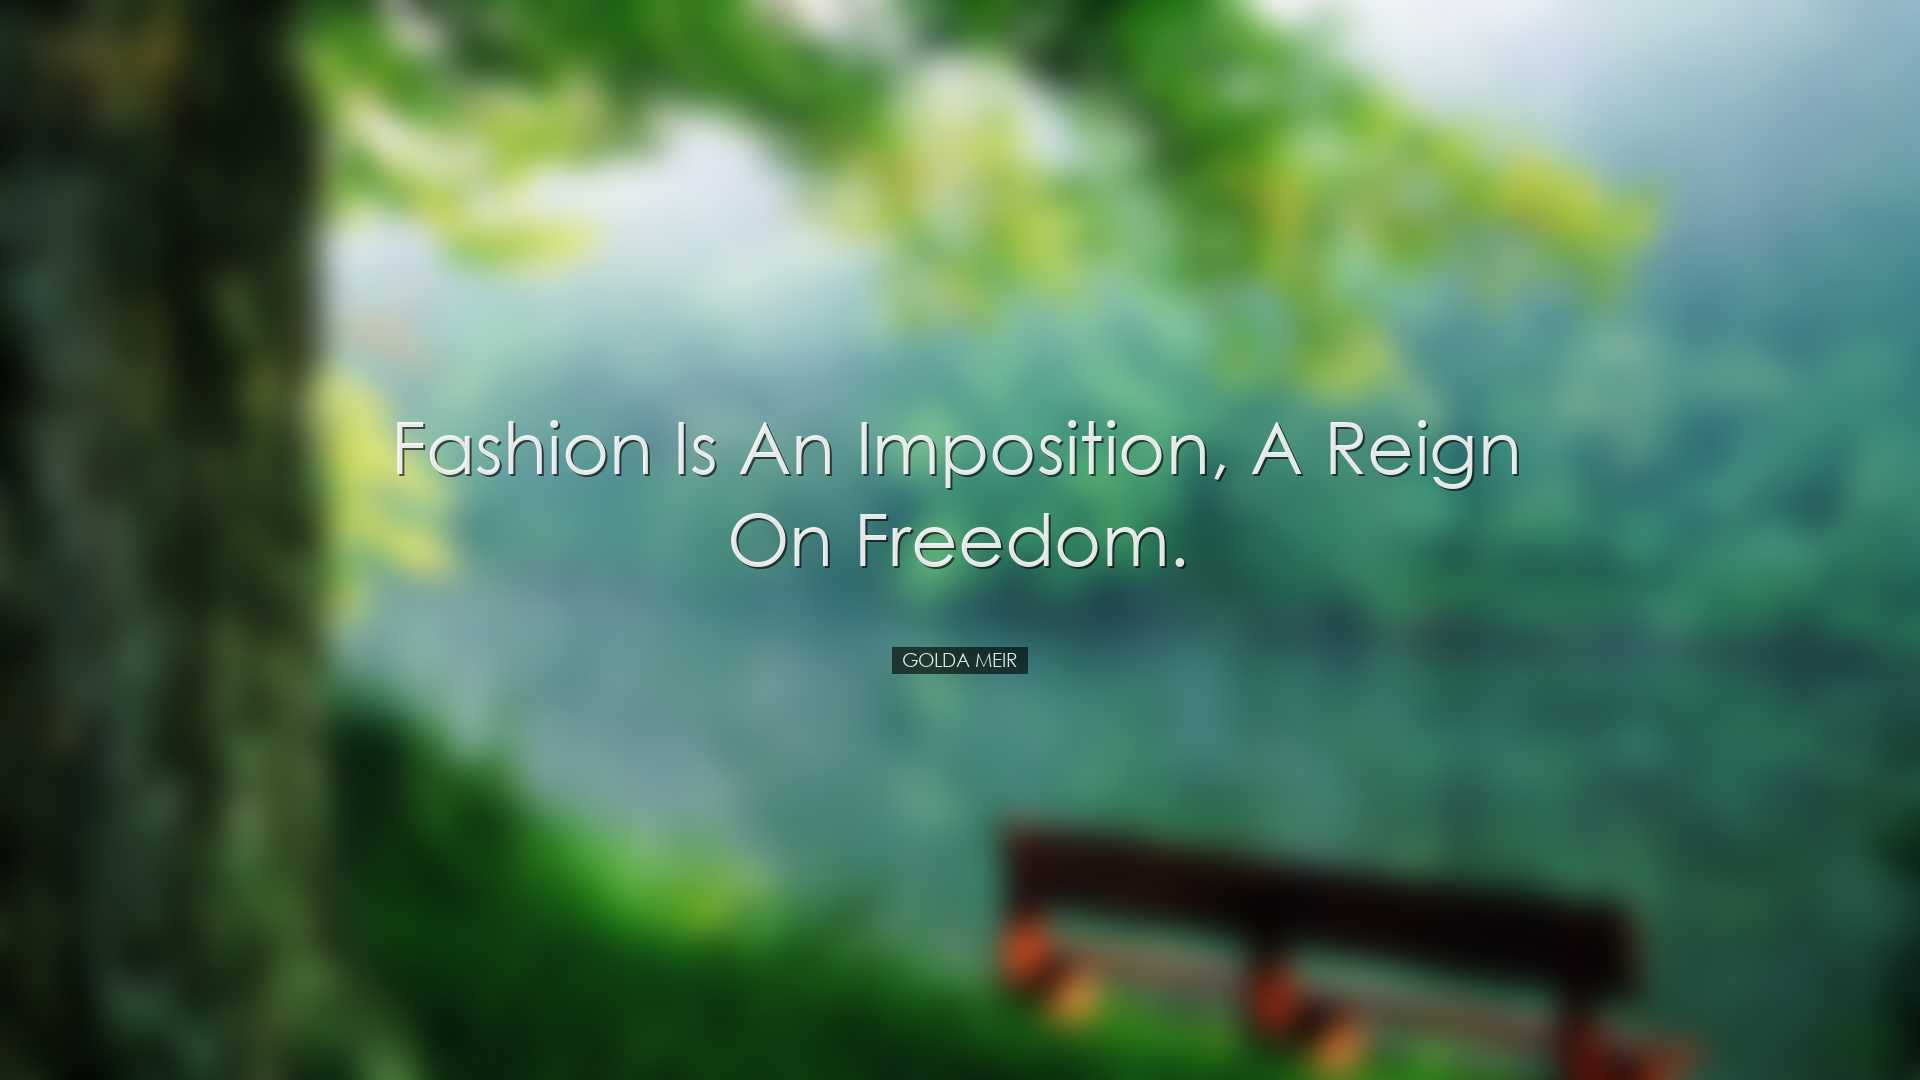 Fashion is an imposition, a reign on freedom. - Golda Meir